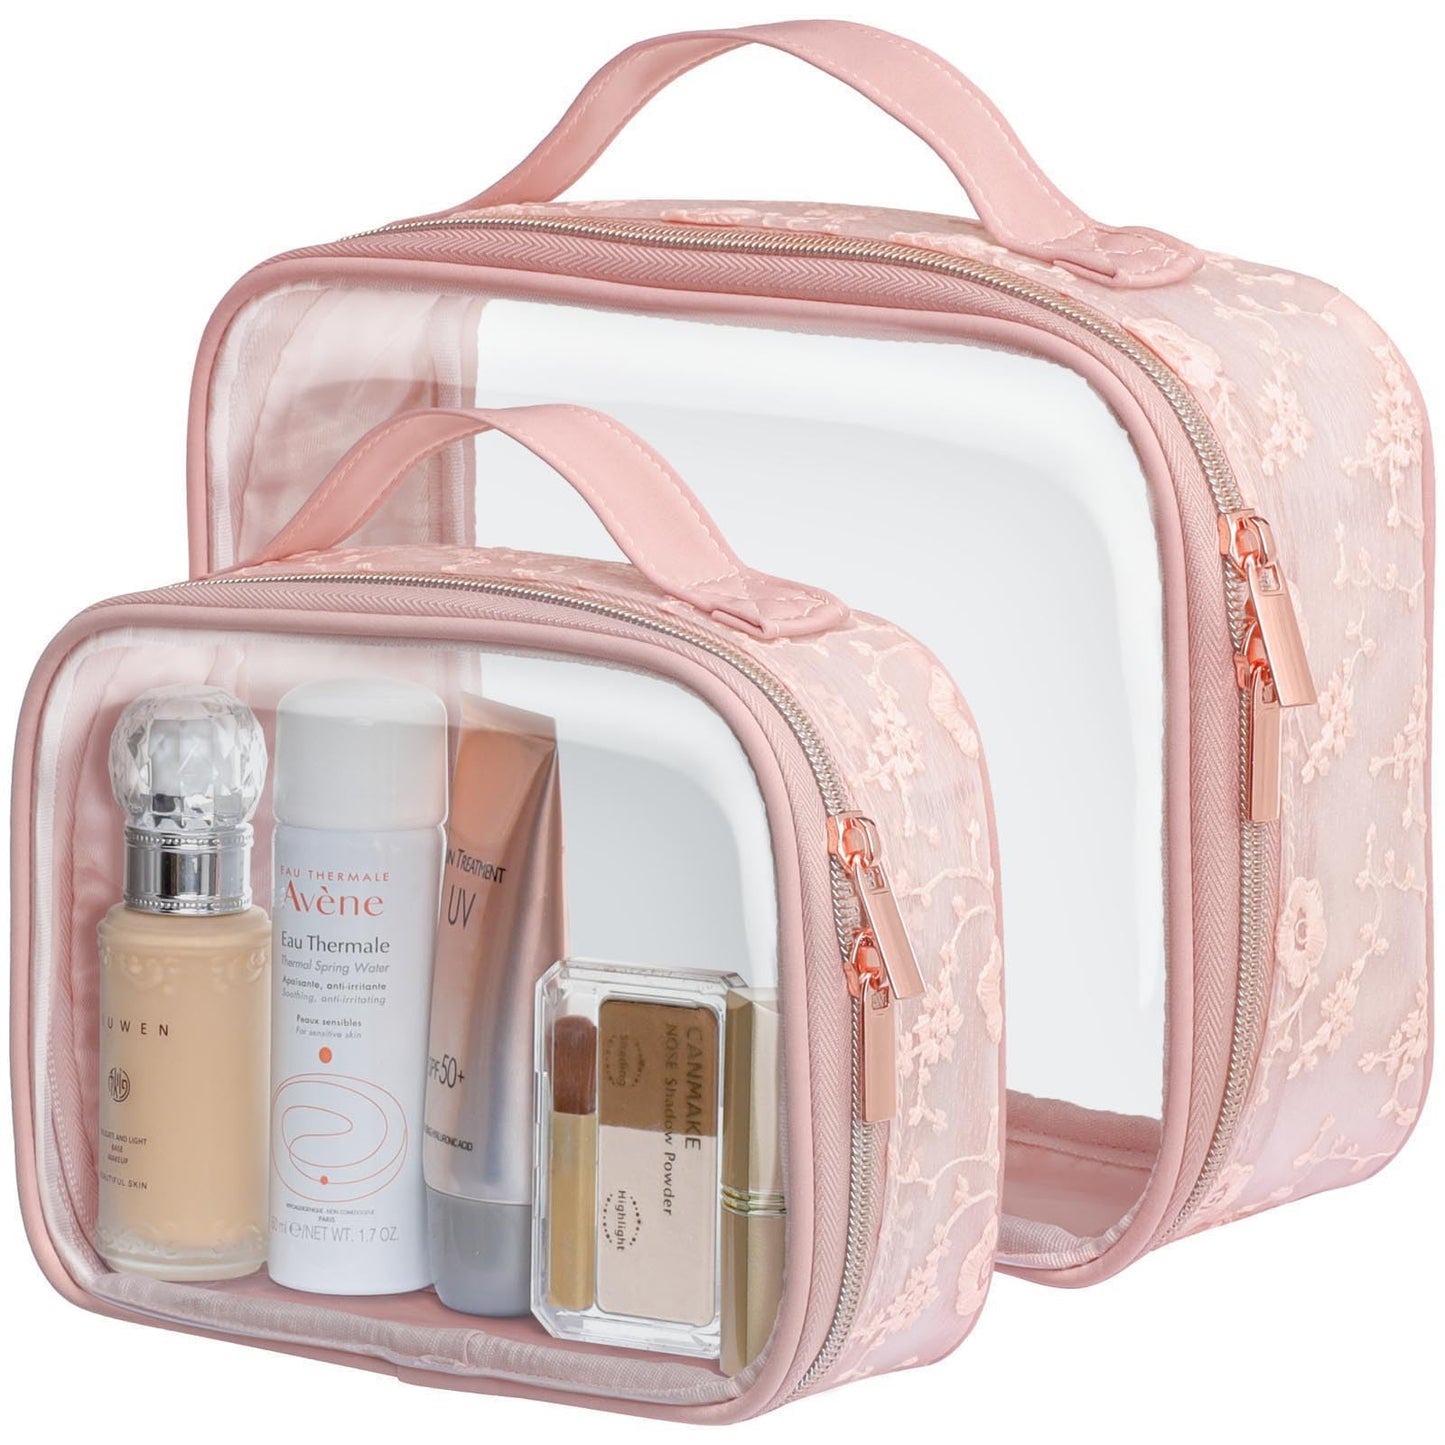 Clear Toiletry Bags